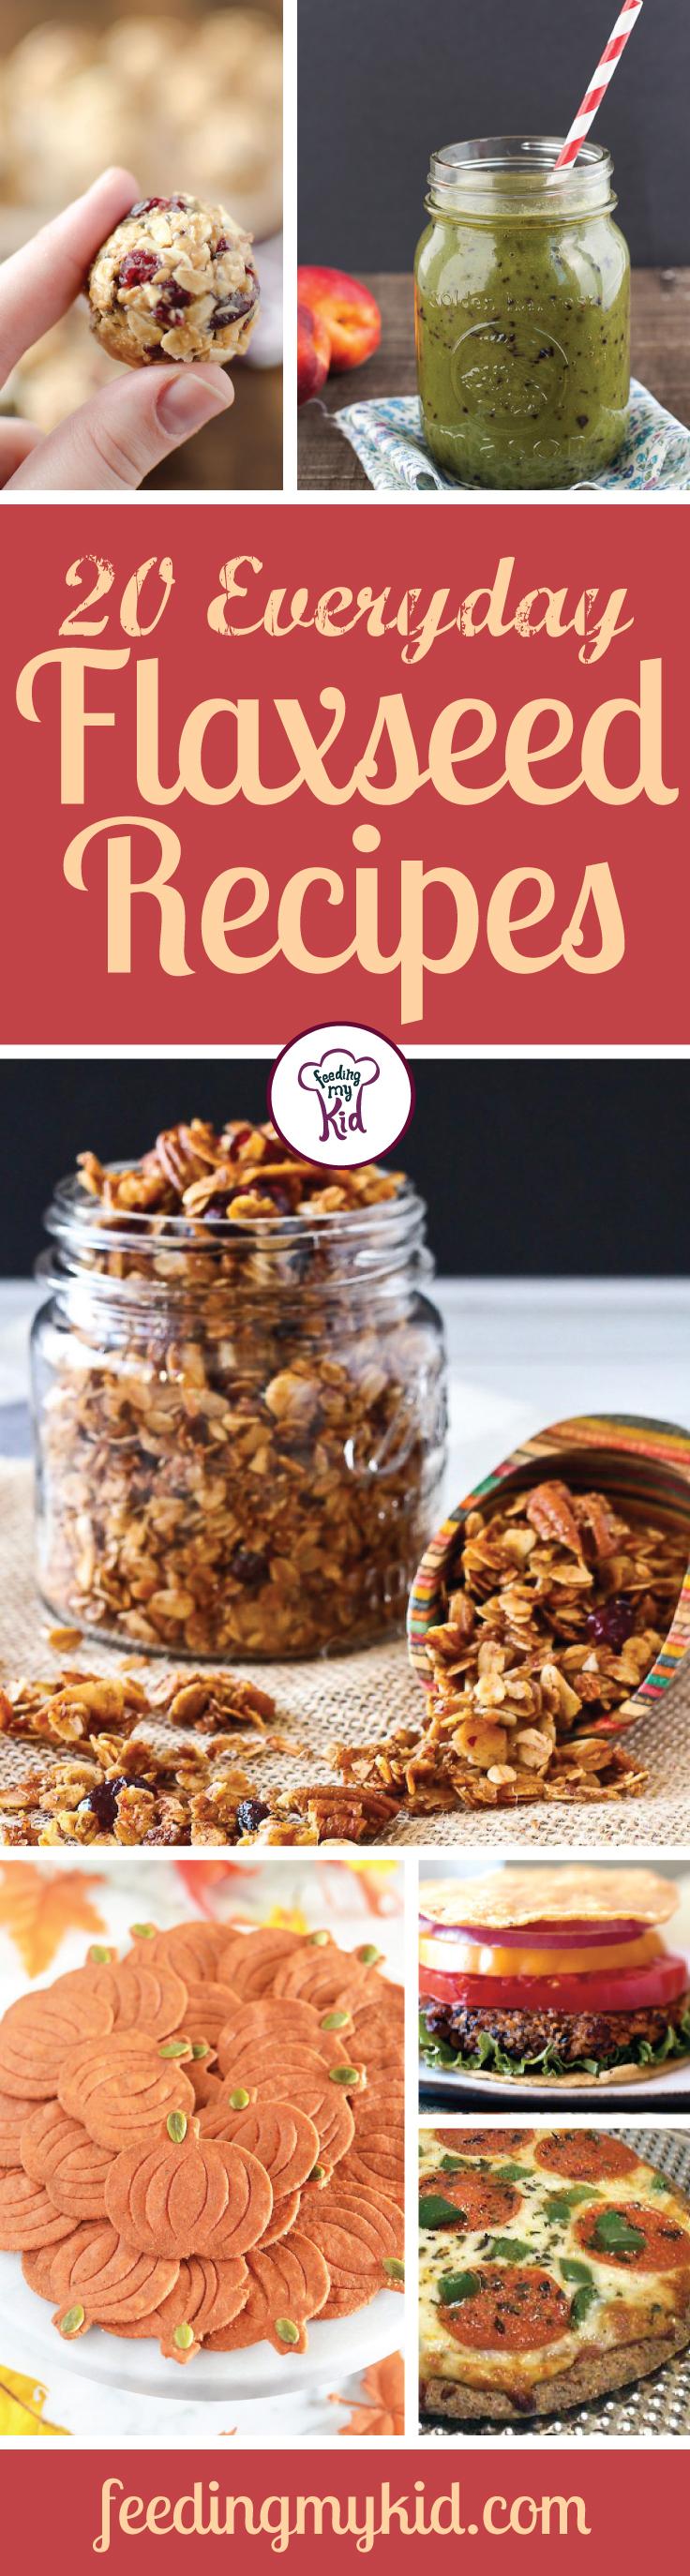 20 Everyday Flaxseed Recipes. Find out how to add flaxseeds to every day foods. From smoothies to granola. You'll love these recipes. Great website for healthy recipes, dinner recipes and ways to eat clean. #easyd